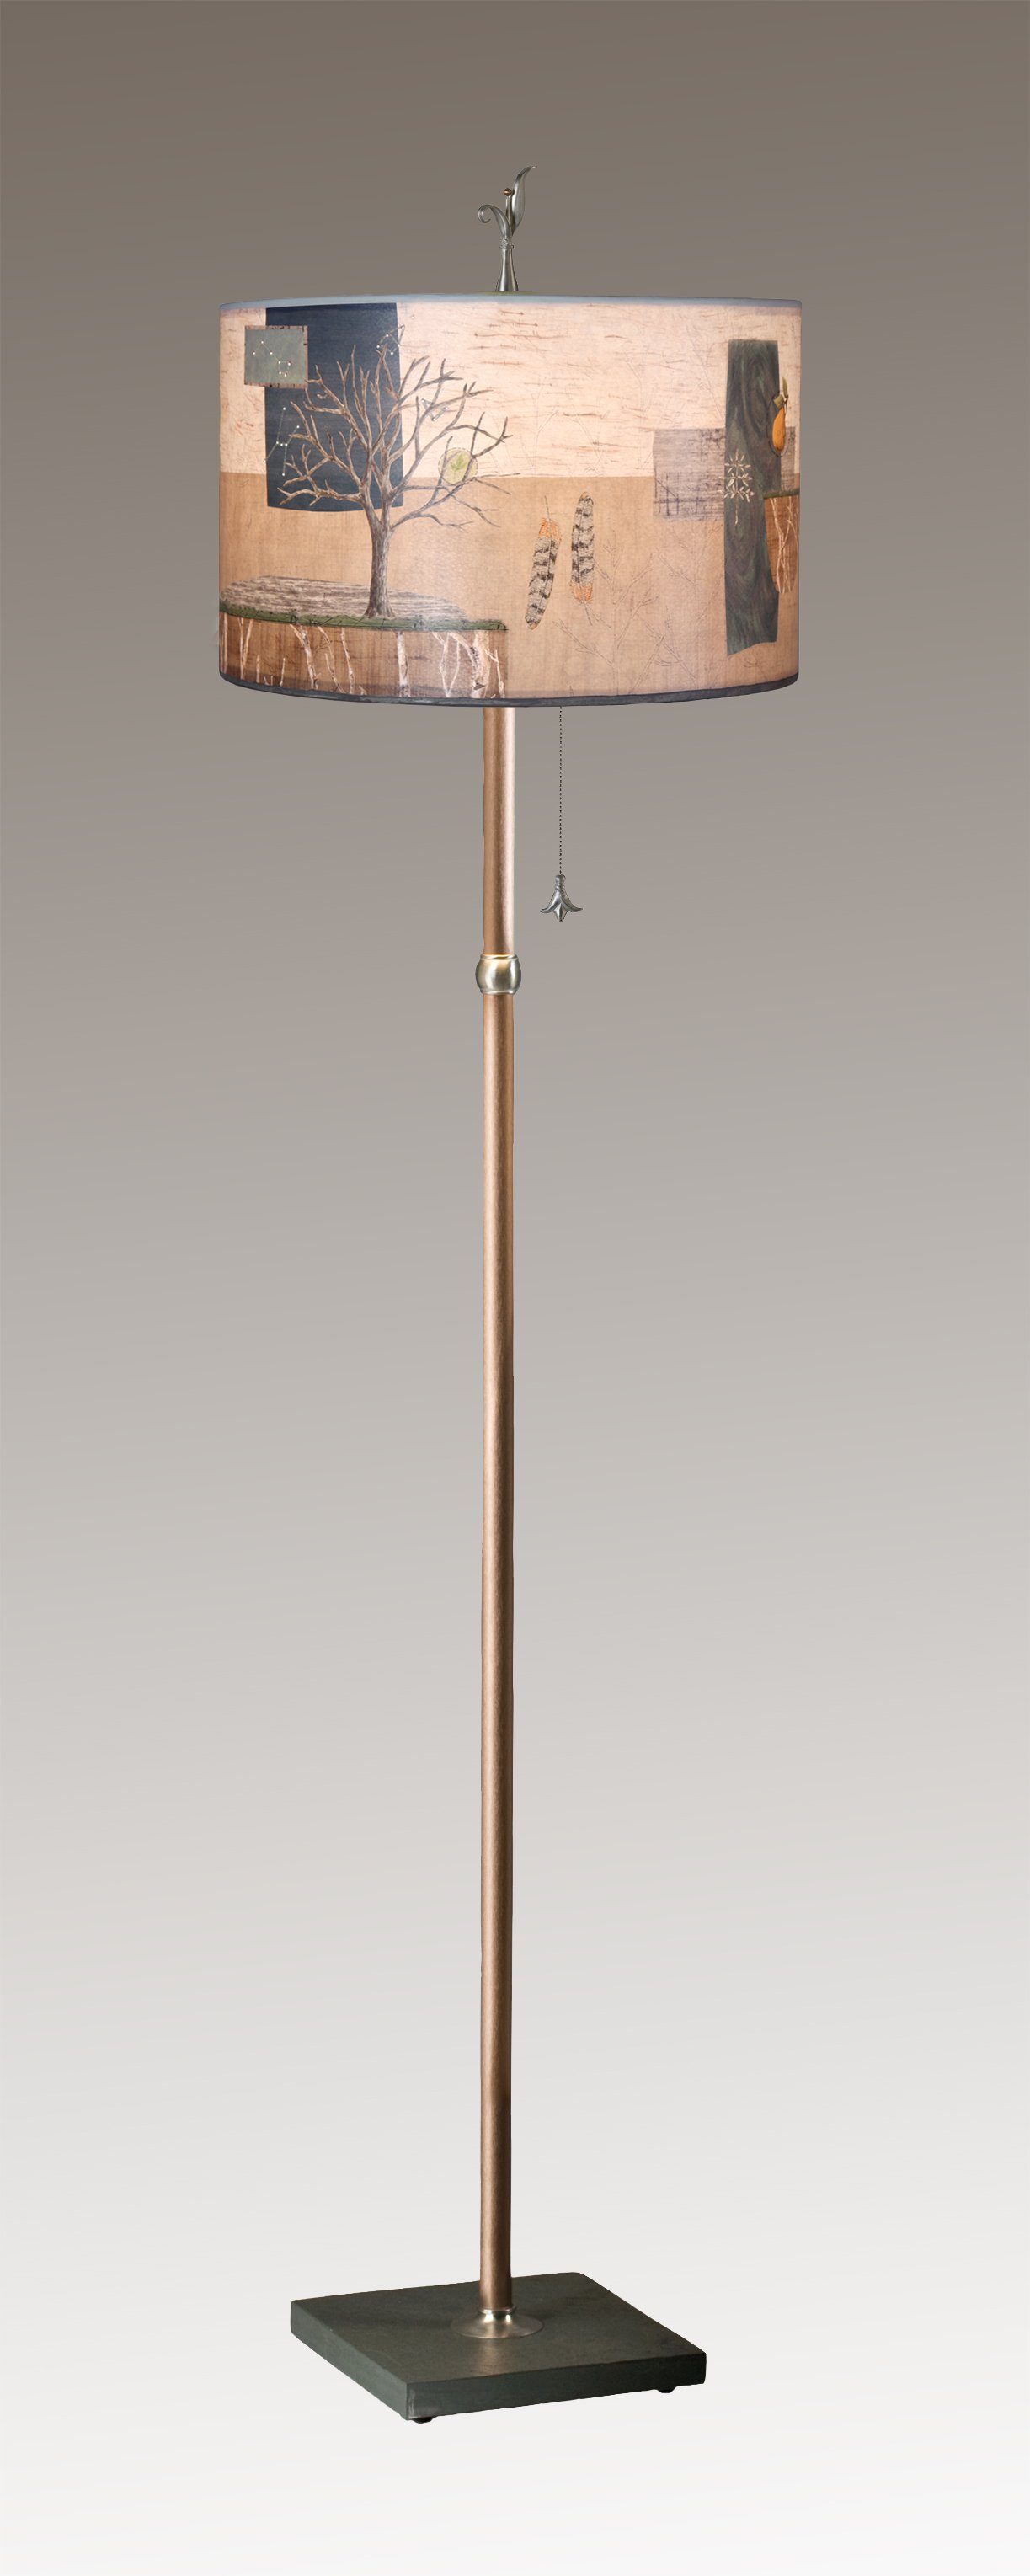 Janna Ugone & Co Floor Lamps Copper Floor Lamp with Large Drum Shade in Wander in Drift